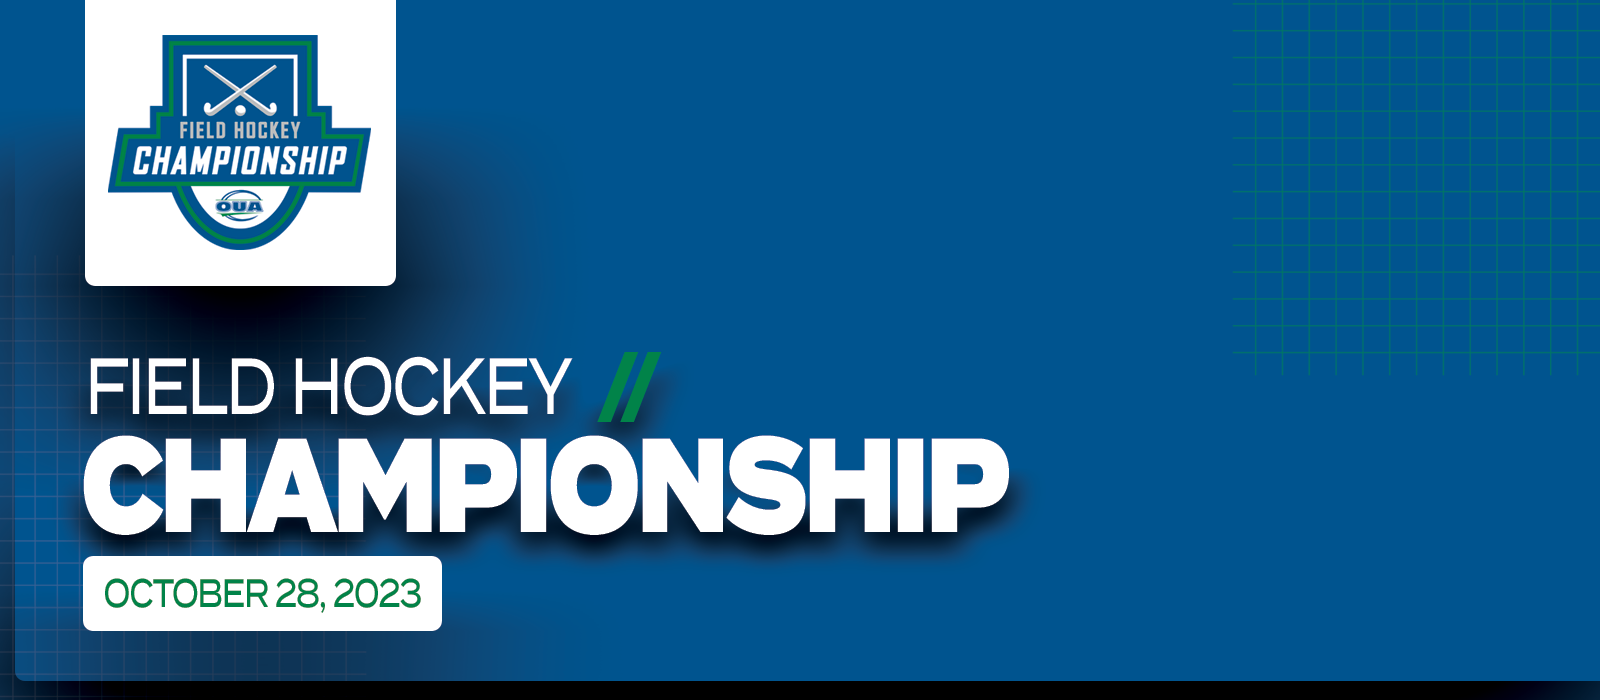 Predominantly blue graphic with large white text on the left side that reads Field Hockey Championship, October 28, 2023’ beneath the OUA Field Hockey Championship logo